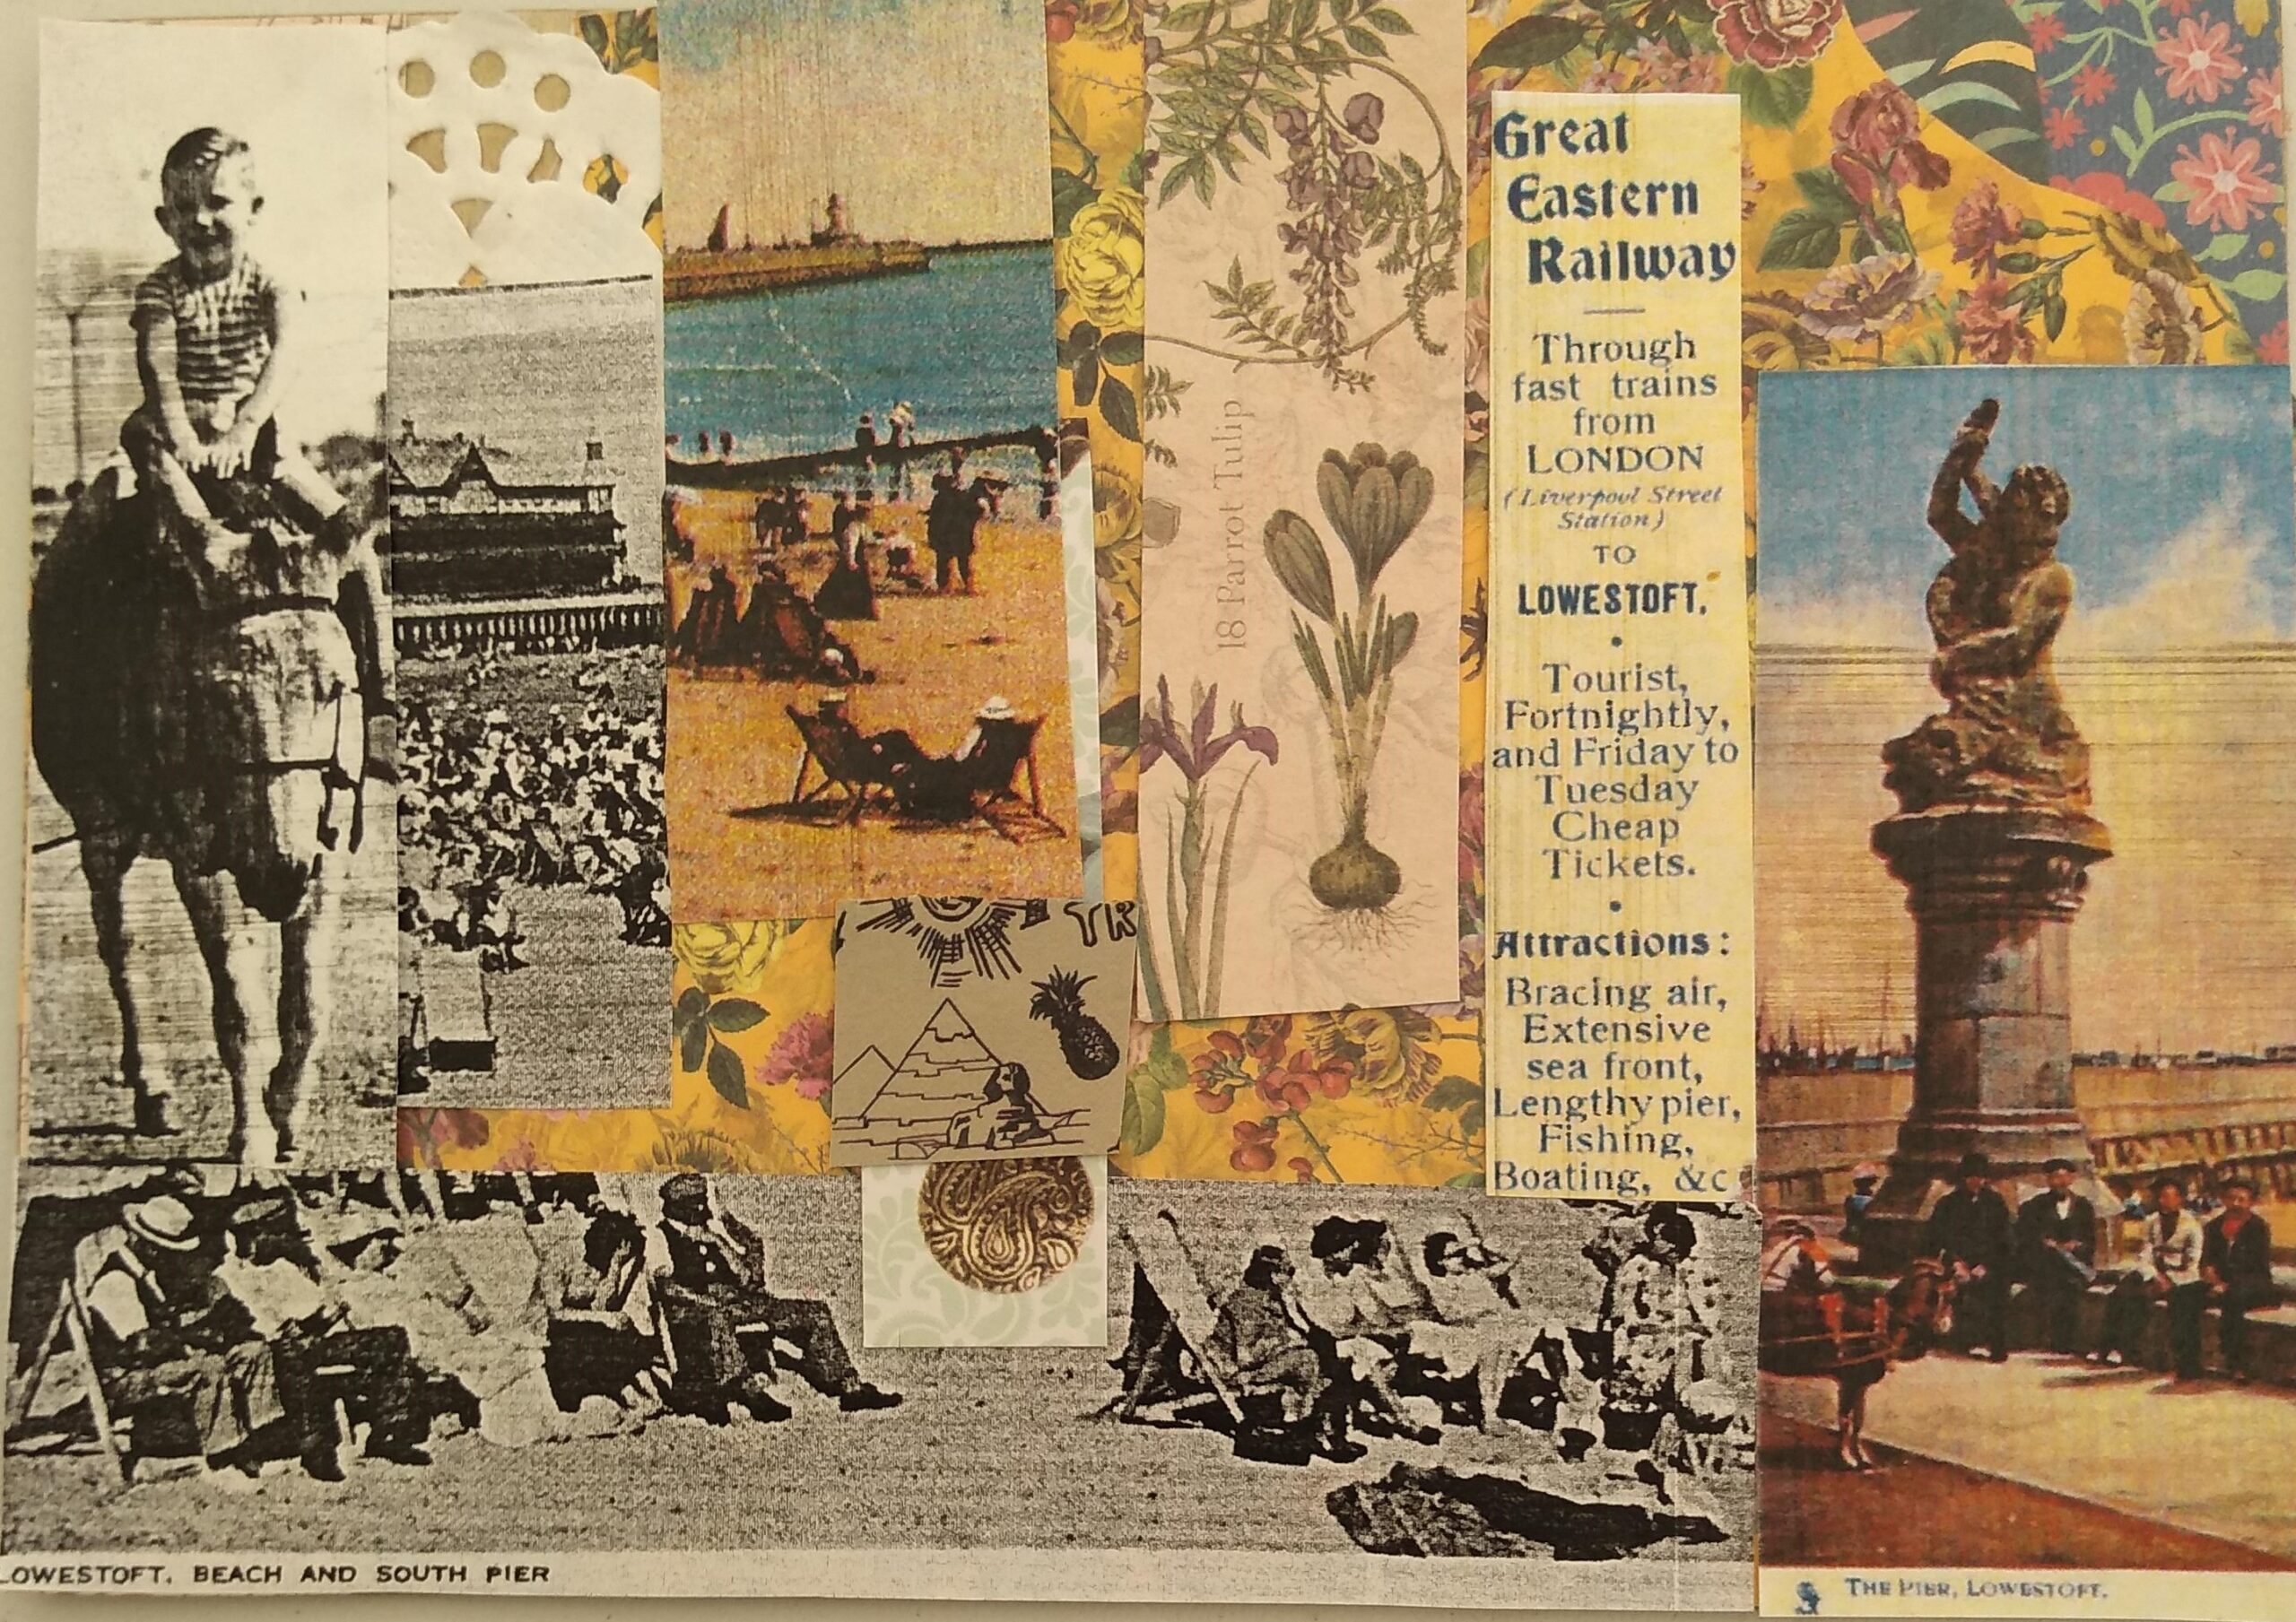 A postcard created with collaged images from vintage postcards including a donkey, a statue, people sitting in deckchairs on the beach and an advertisement by Great Eastern Railways